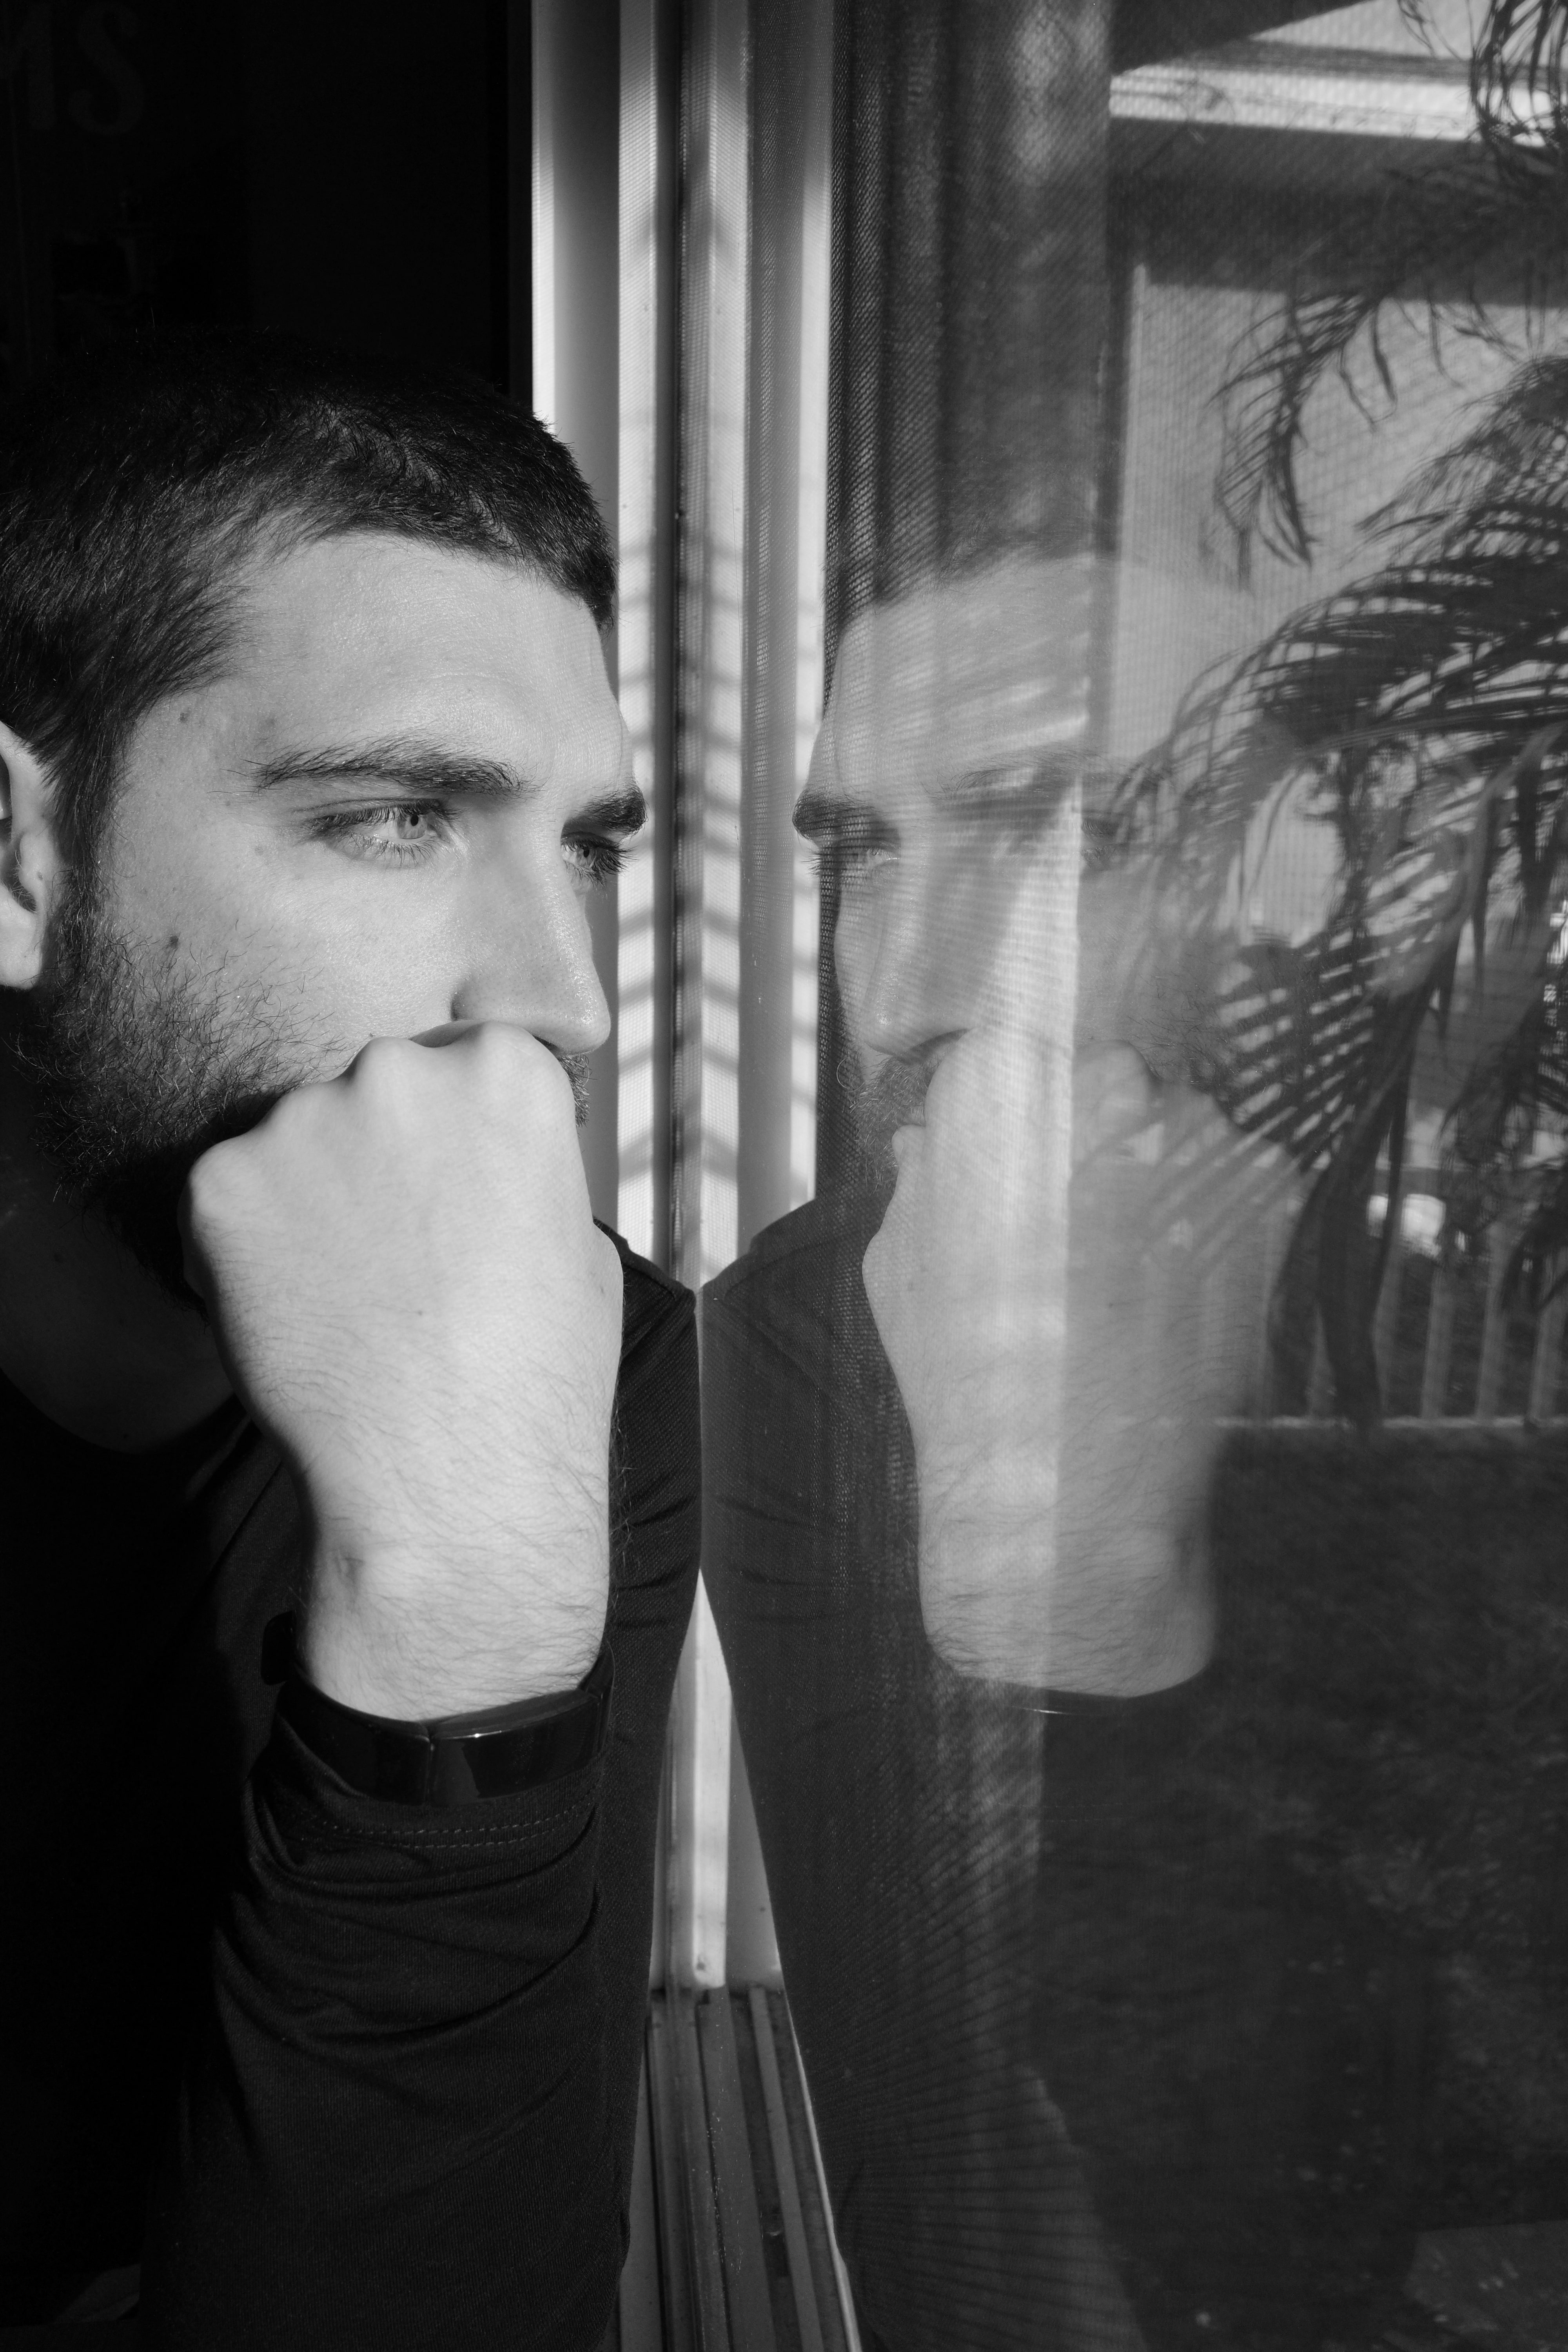 A monochromatic self-portrait - me looking out the window while my reflection on the window looks back at me.